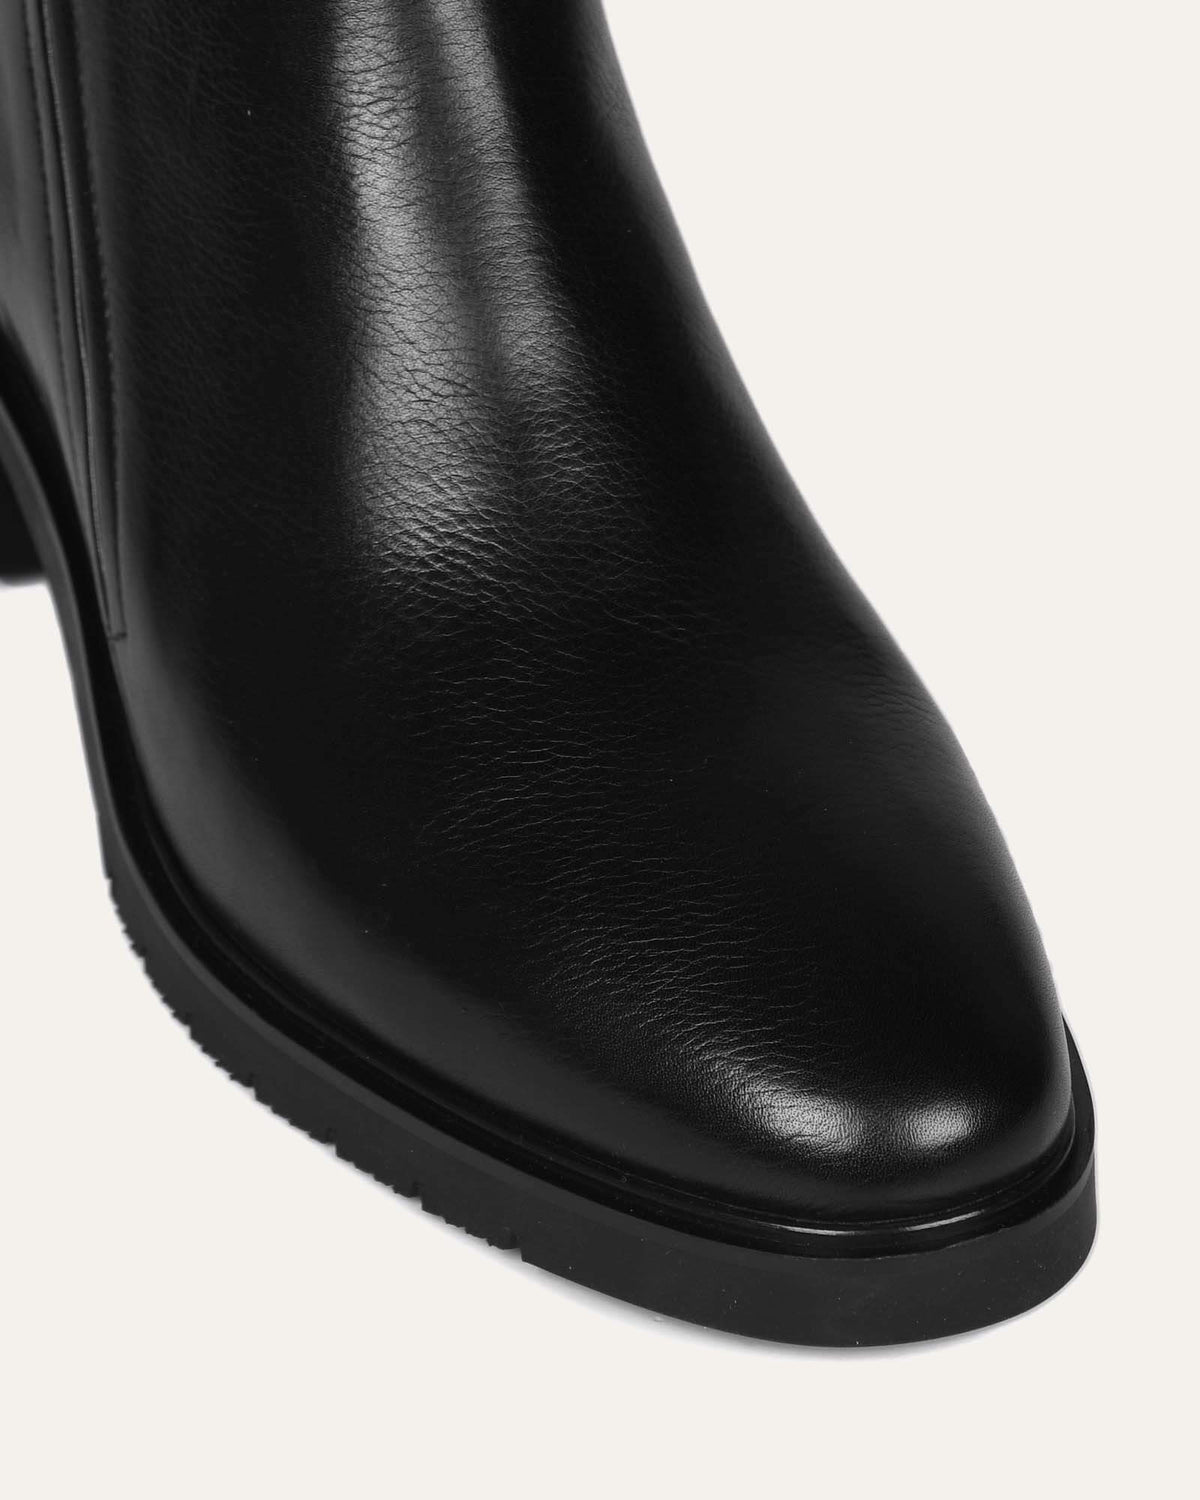 ARTIE FLAT ANKLE BOOTS BLACK LEATHER